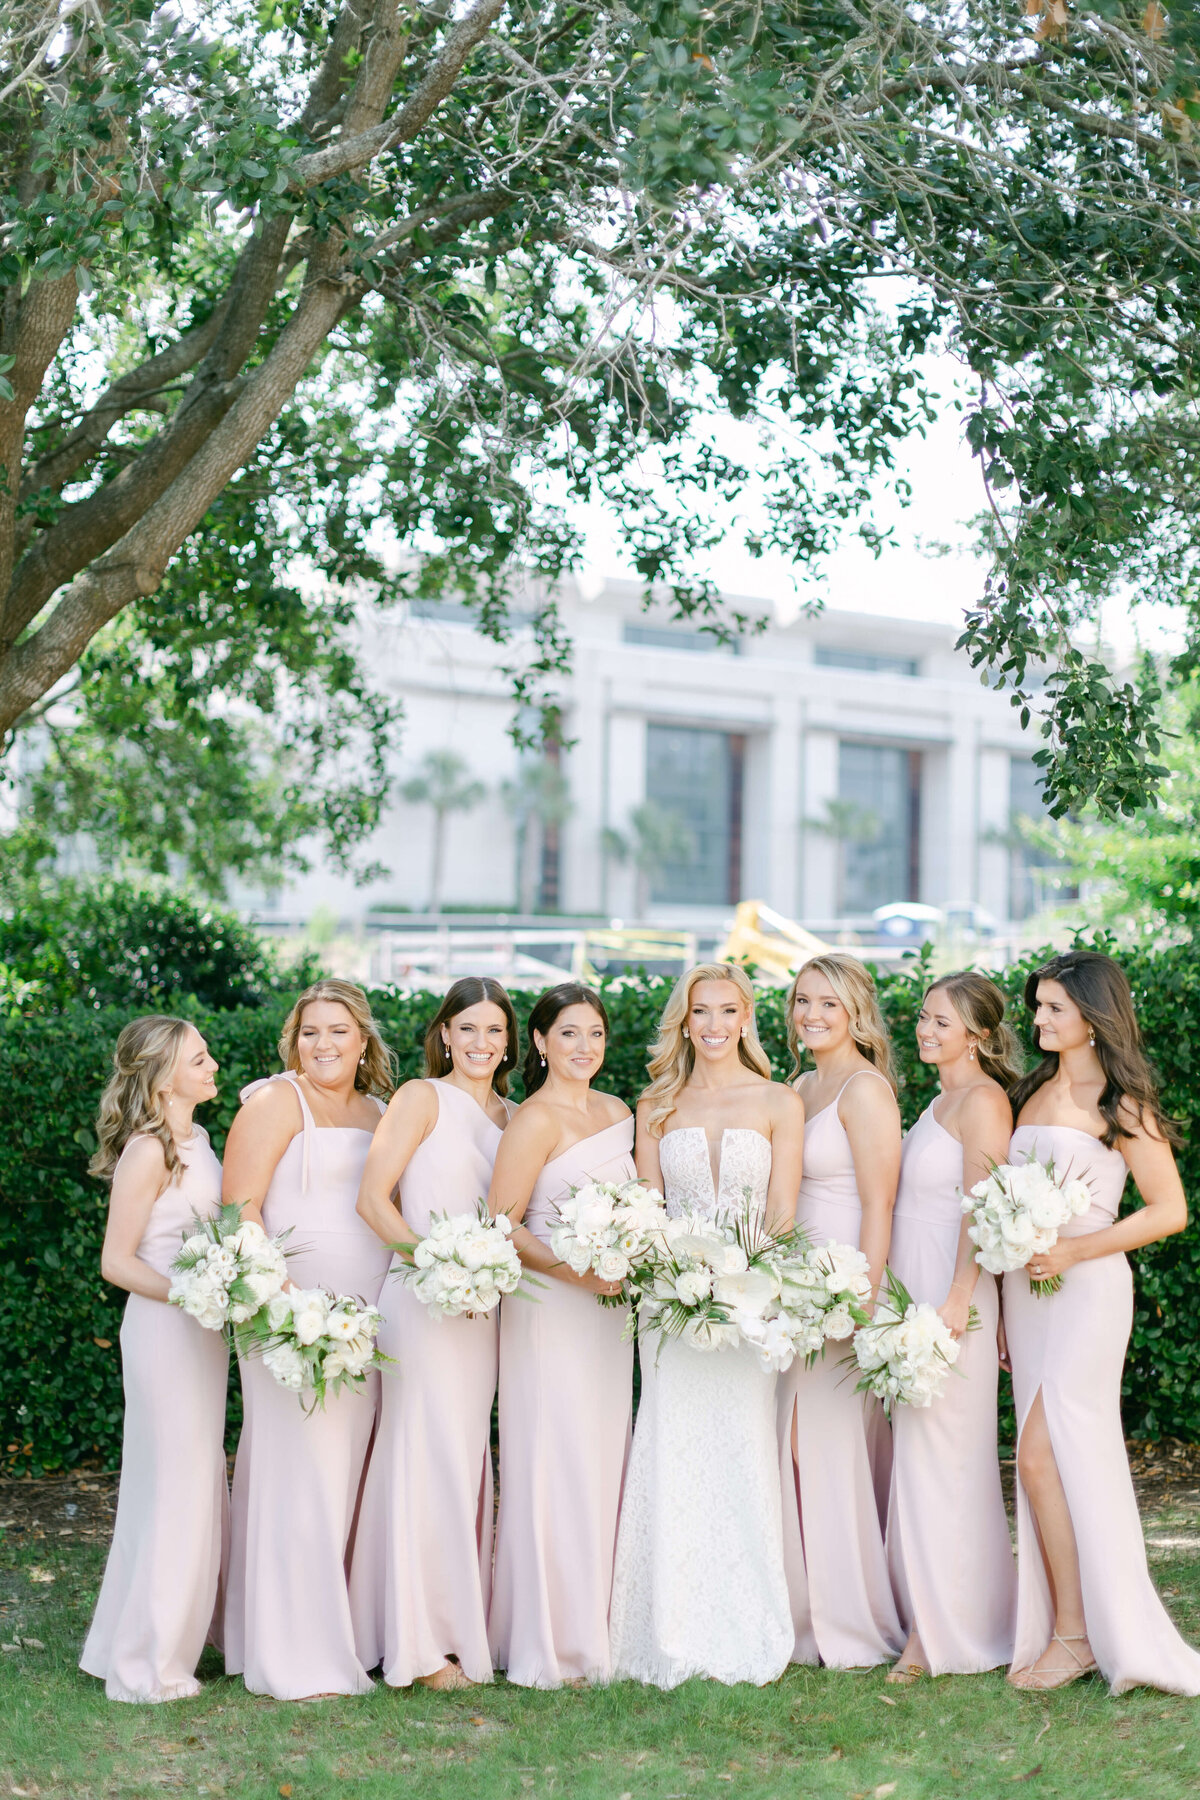 A bride holding florals with her bridesmaids.